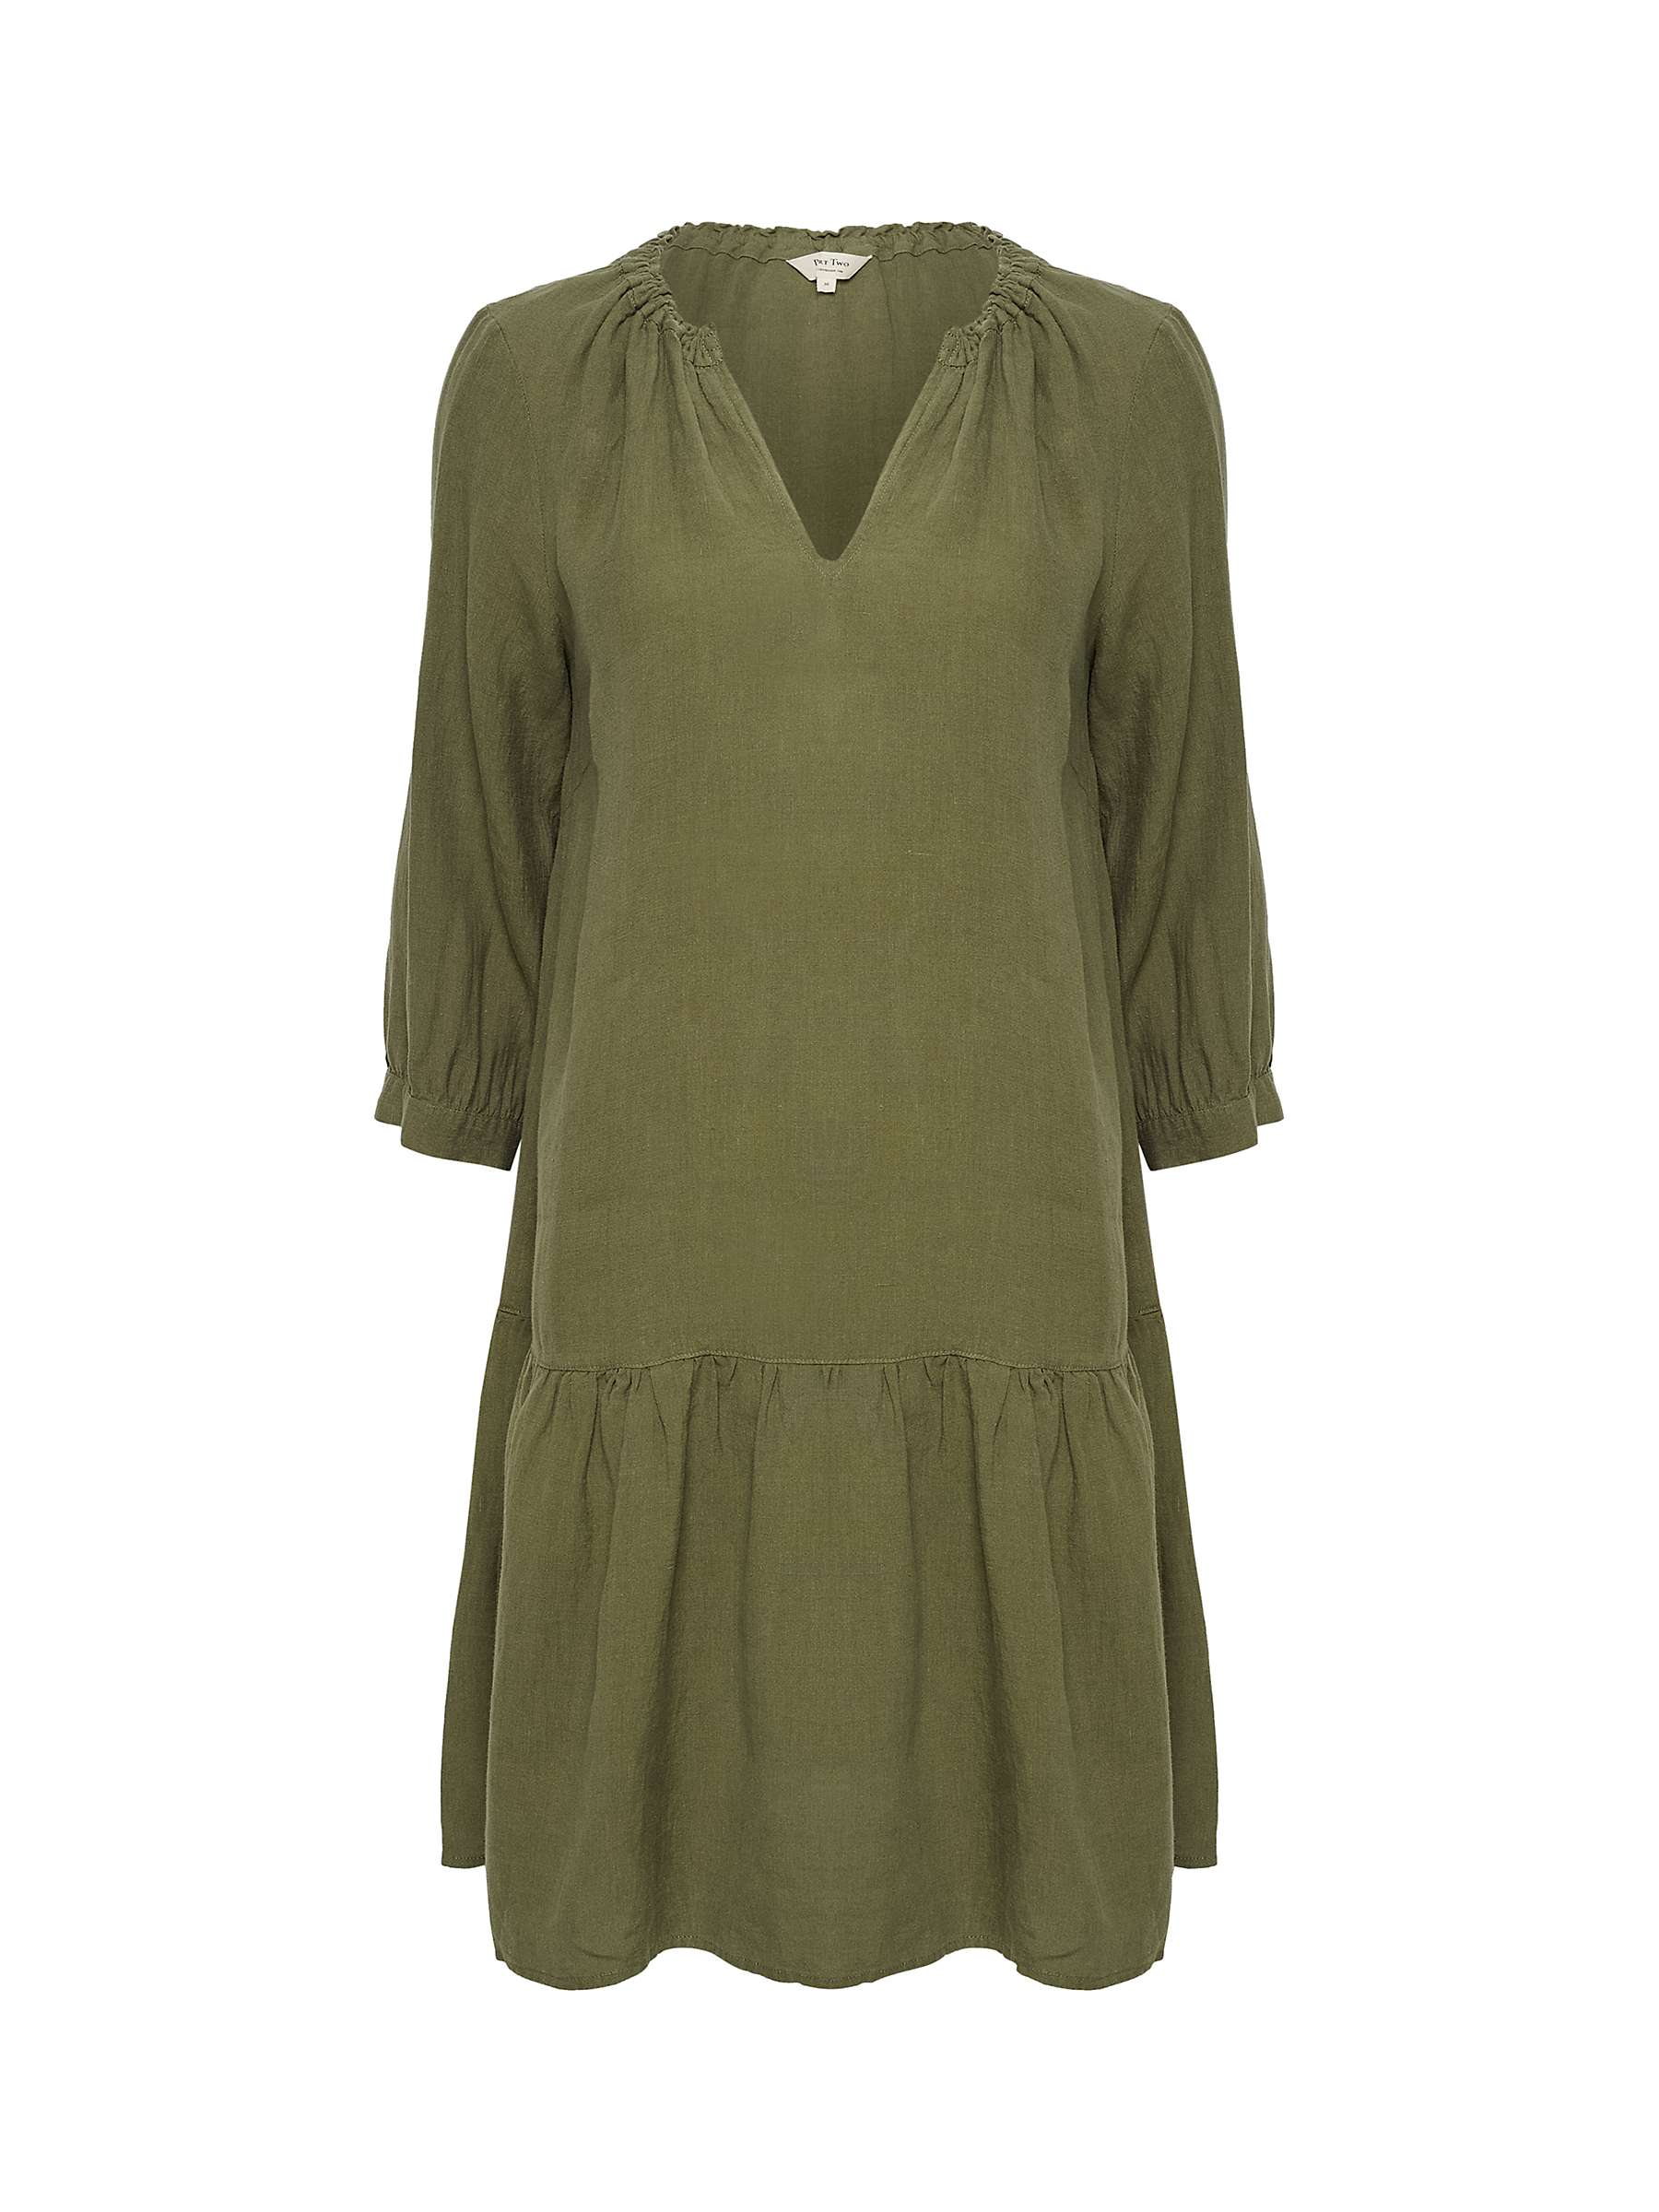 Buy Part Two Chania Relaxed Fit Linen Knee Length Dress, Kalamata Online at johnlewis.com